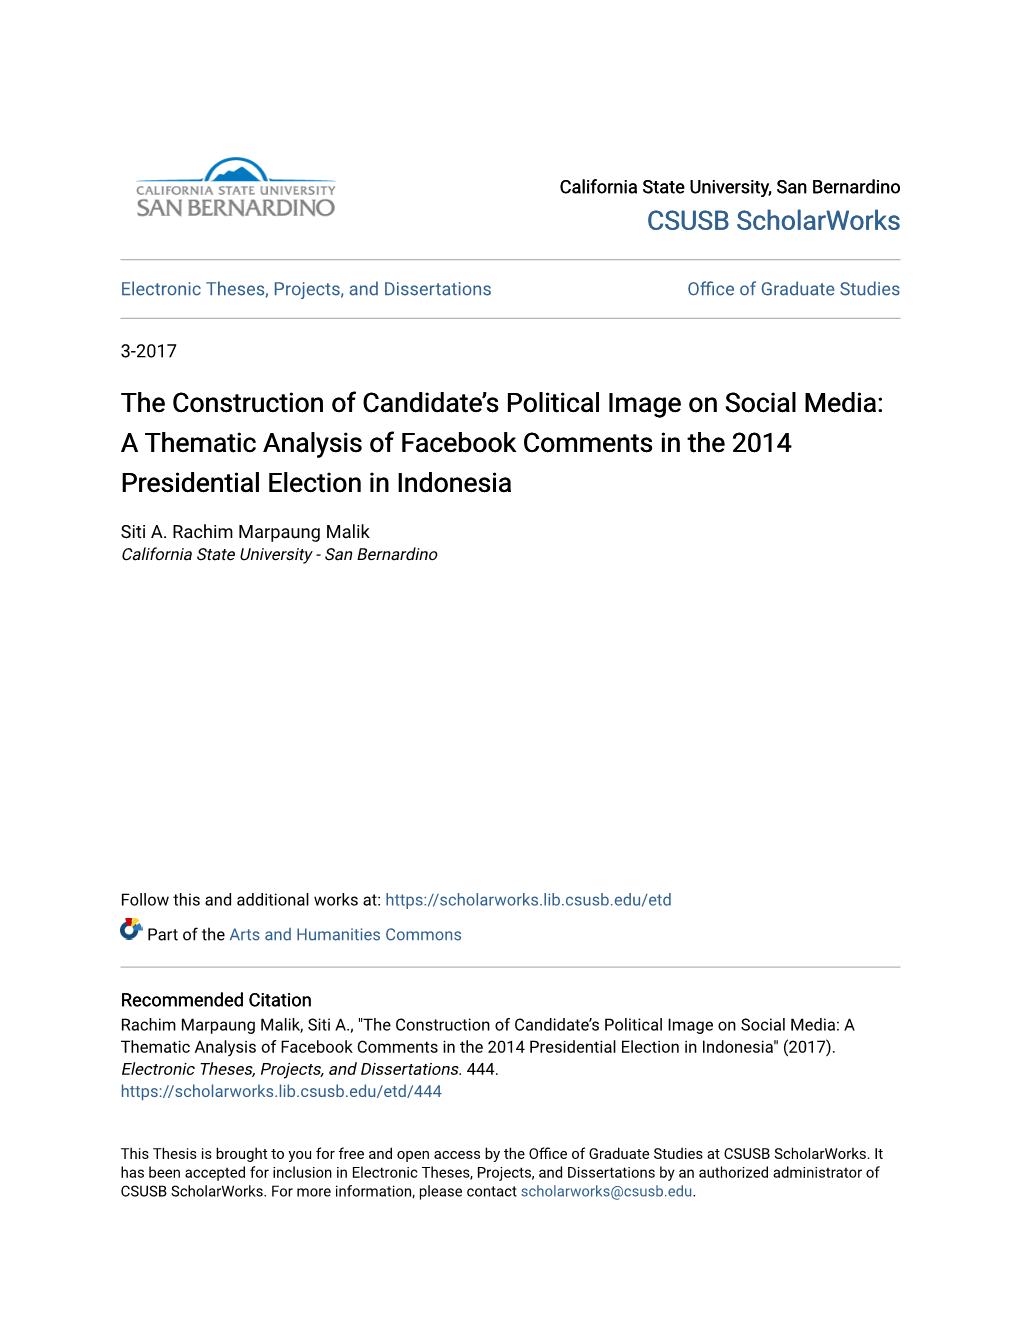 The Construction of Candidate's Political Image on Social Media: a Thematic Analysis of Facebook Comments in the 2014 Presiden